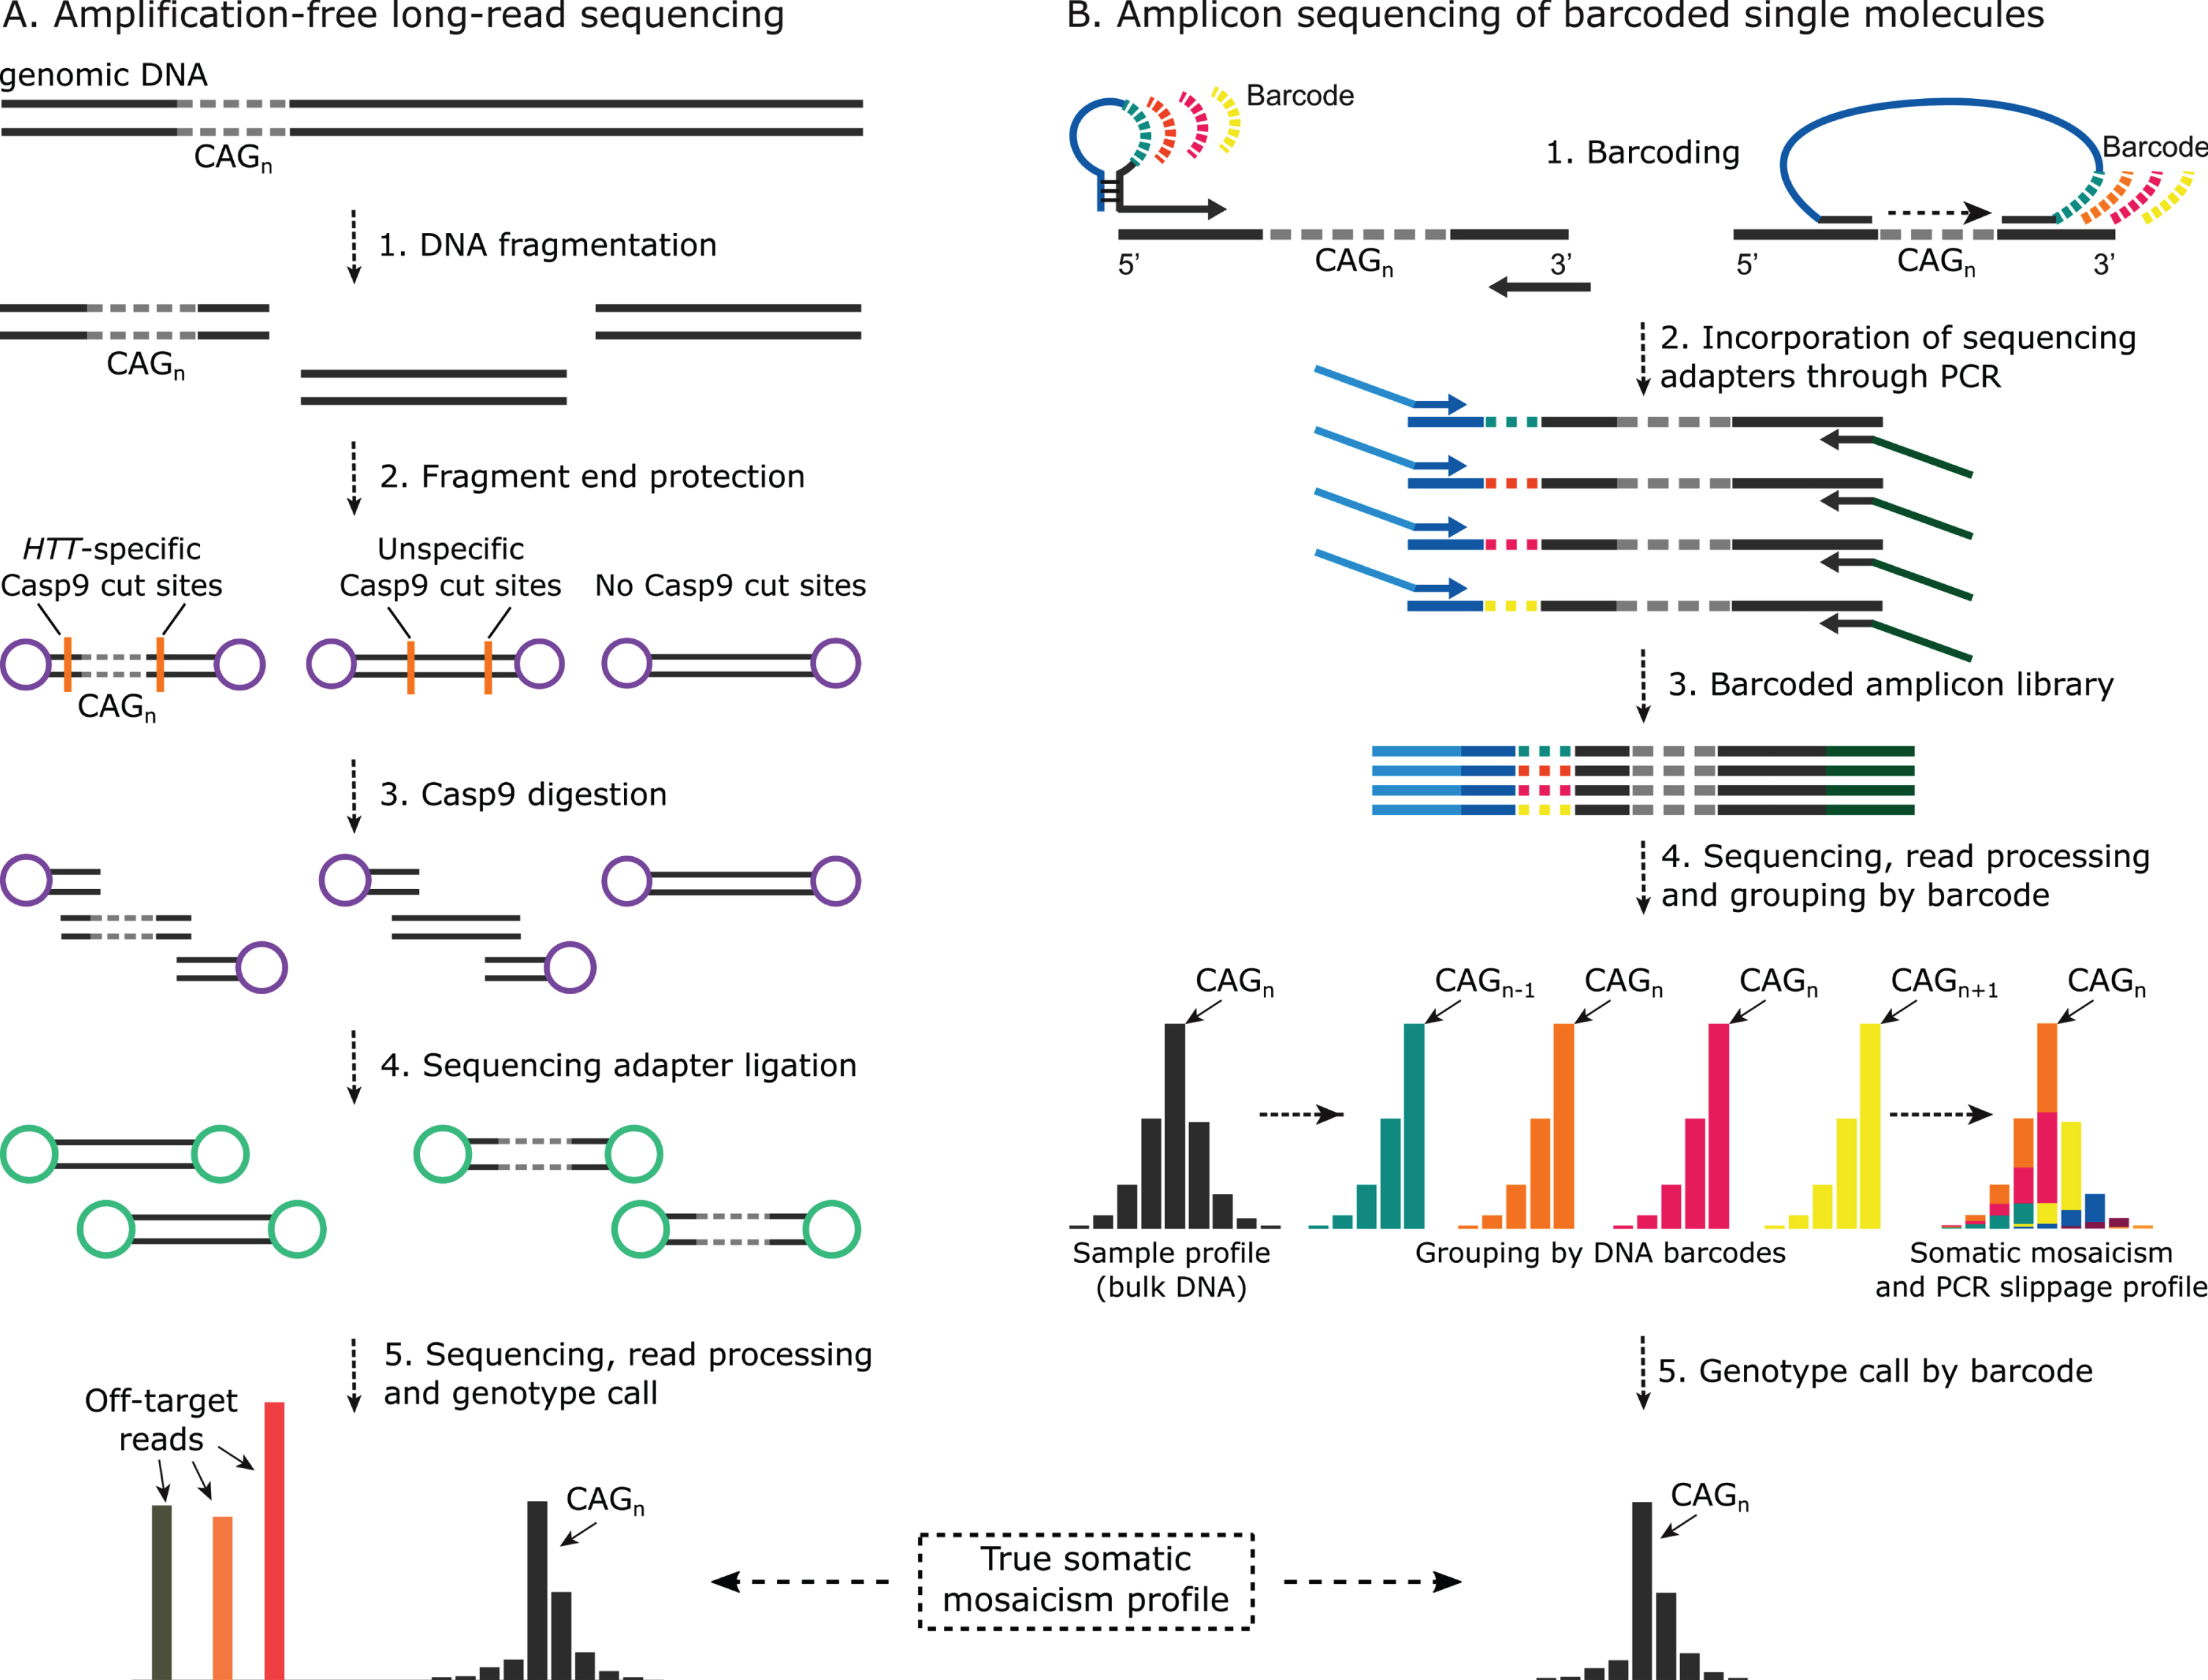 Method summary for somatic mosaicism quantification at the level of a single molecule in HD. A) Generalised schematics for CRISPR/Casp9-mediated targeted enrichment of HTT locus for single-molecule long-read sequencing (i.e., no-amp targeted sequencing). Following DNA fragmentation and DNA molecule protection by adapter ligation or de-phosphorylation, CRISPR/Cas9 and locus-specific guide RNAs are used to selectively cut across the region of interest. While undigested DNA fragment ends are still protected, sequencing adapters are ligated to the Cas9 digestion product. Sequencing is then done on the appropriate single-molecule long-read sequencing platform such as PacBio SMRT or Oxford Nanopore Technologies (ONT). No-amp targeted sequencing studies of repeat expansions have used one or two Cas9 cuts with PacBio sequencing [31, 49, 57, 59] or ONT sequencing [58] respectively. Single-molecule sequencing read output can then be used to build the somatic mosaicism profile. B) The general method for amplicon sequencing of barcoded single molecules. Several methods for single-molecule barcoding exist, including one-cycle PCR using hairpin-protected primers with degenerate tags or region capture by barcoded molecular inversion probes. Following barcoding, sequencing adapters are incorporated into the uniquely tagged molecules through PCR with overhang primers. The resulting amplicon library is then sequenced on the platform of interest, including Illumina MiSeq or PacBio, depending on the amplicon length and the desired throughput. Resulting reads are grouped by barcode family, and the repeat length of the original molecule for each family is determined to build the real somatic mosaicism profile per sample.